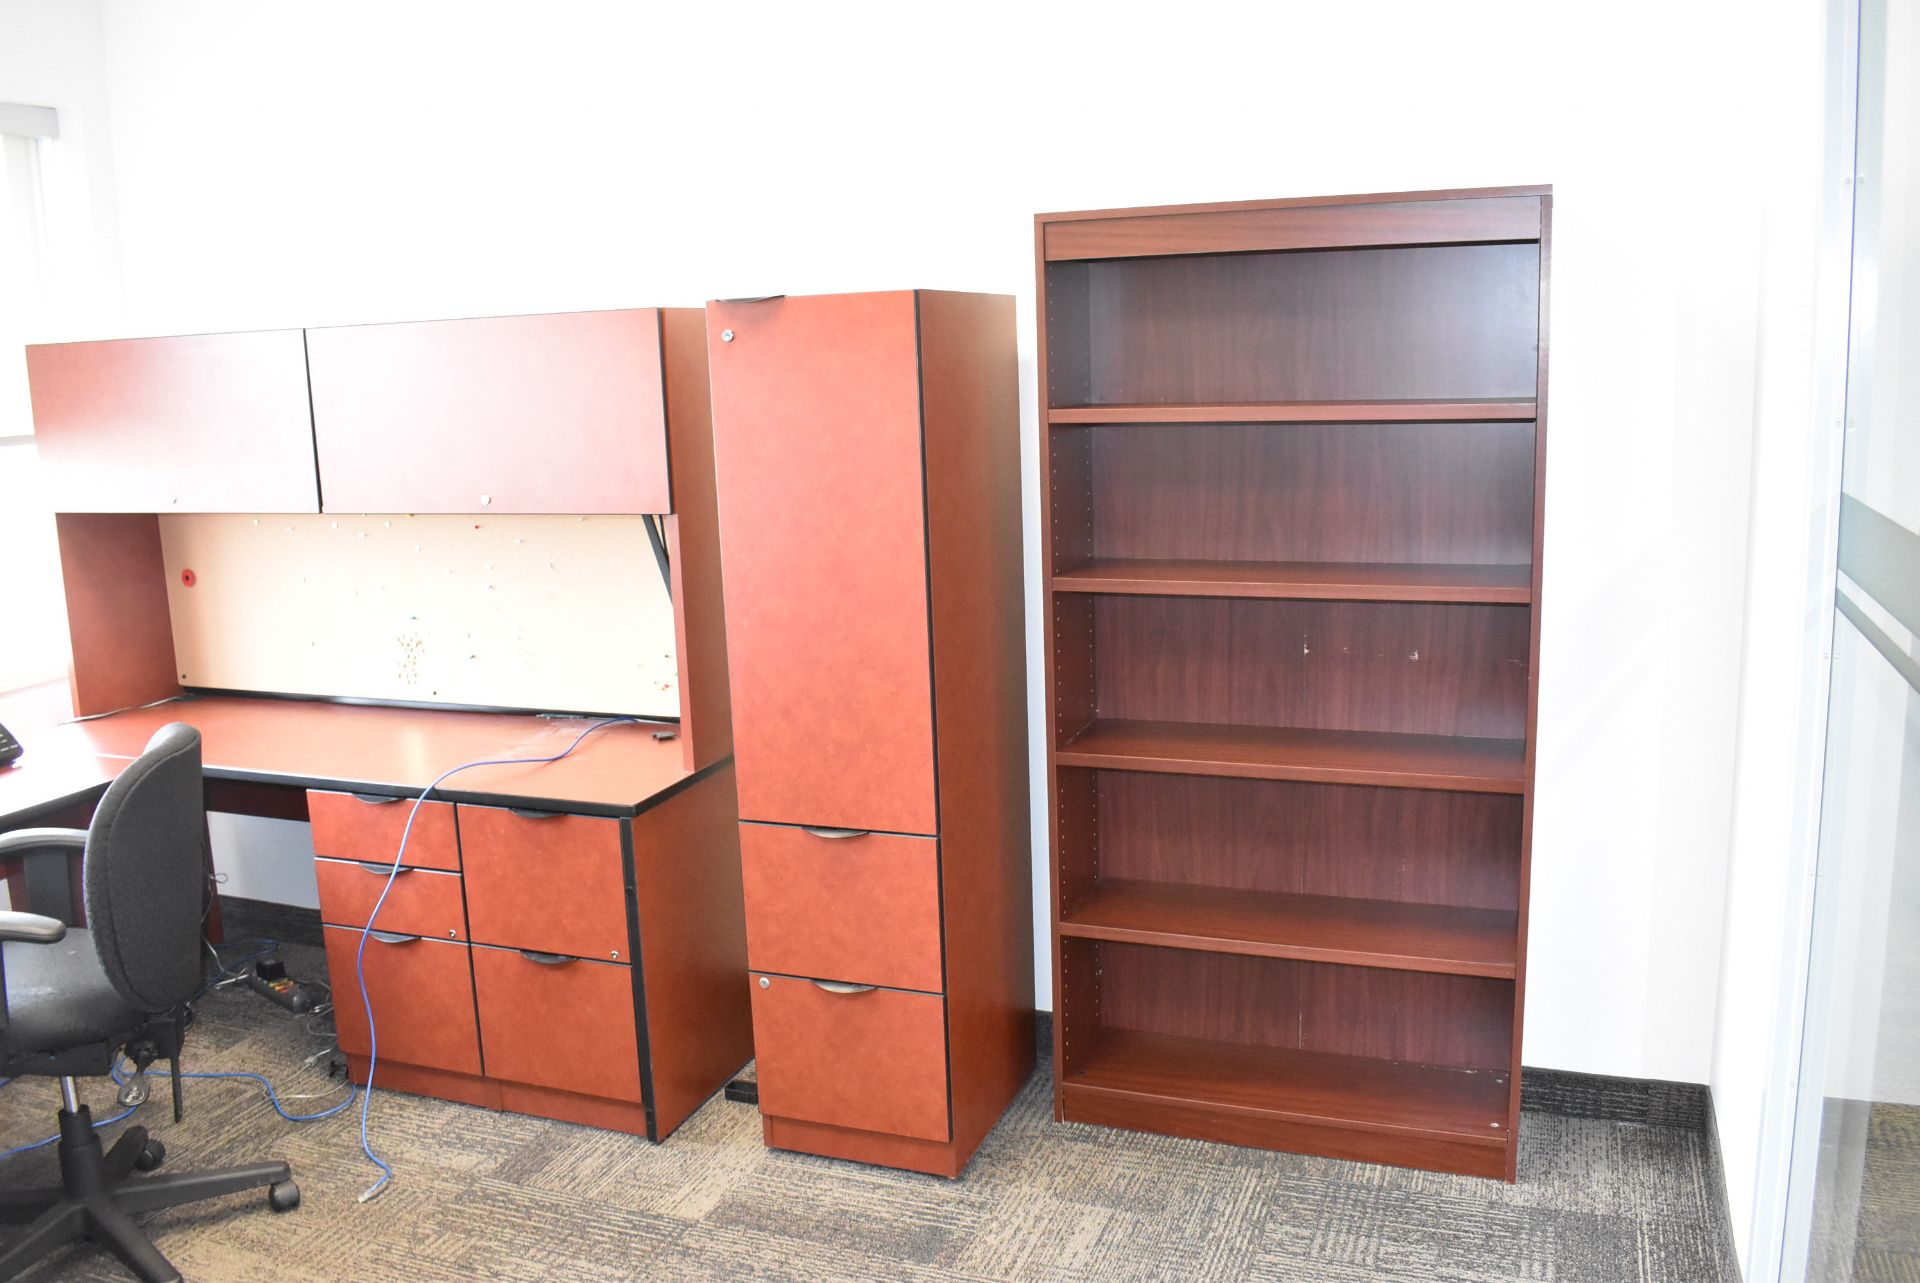 LOT/ CONTENTS OF OFFICE CONSISTING OF DESK WITH OFFICE CHAIR, OVERHEAD DESK HUTCH, STORAGE - Image 2 of 2